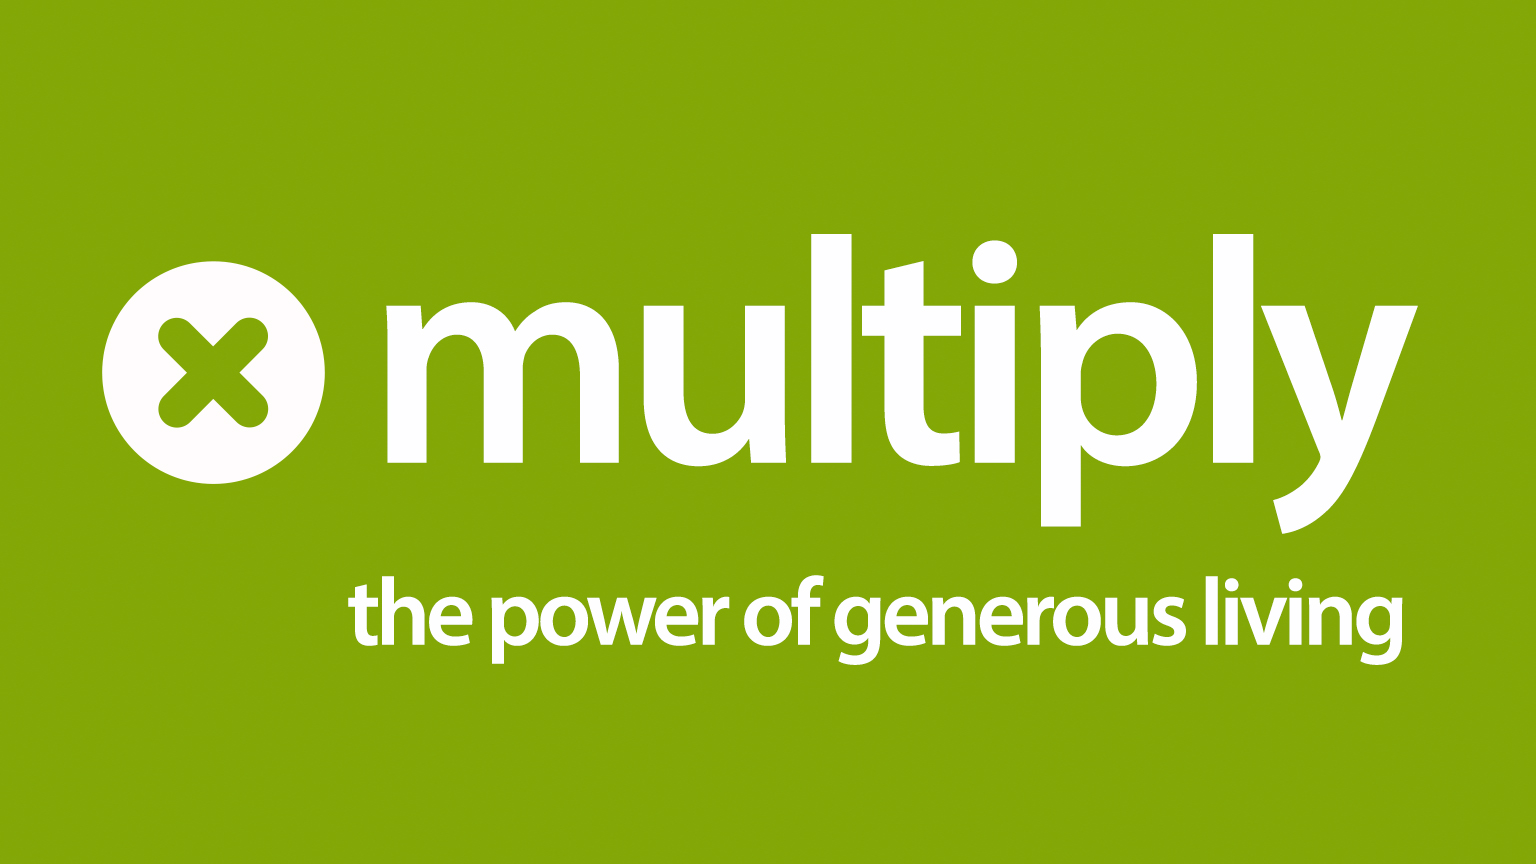  Multiply Part 1 - Why generosity works